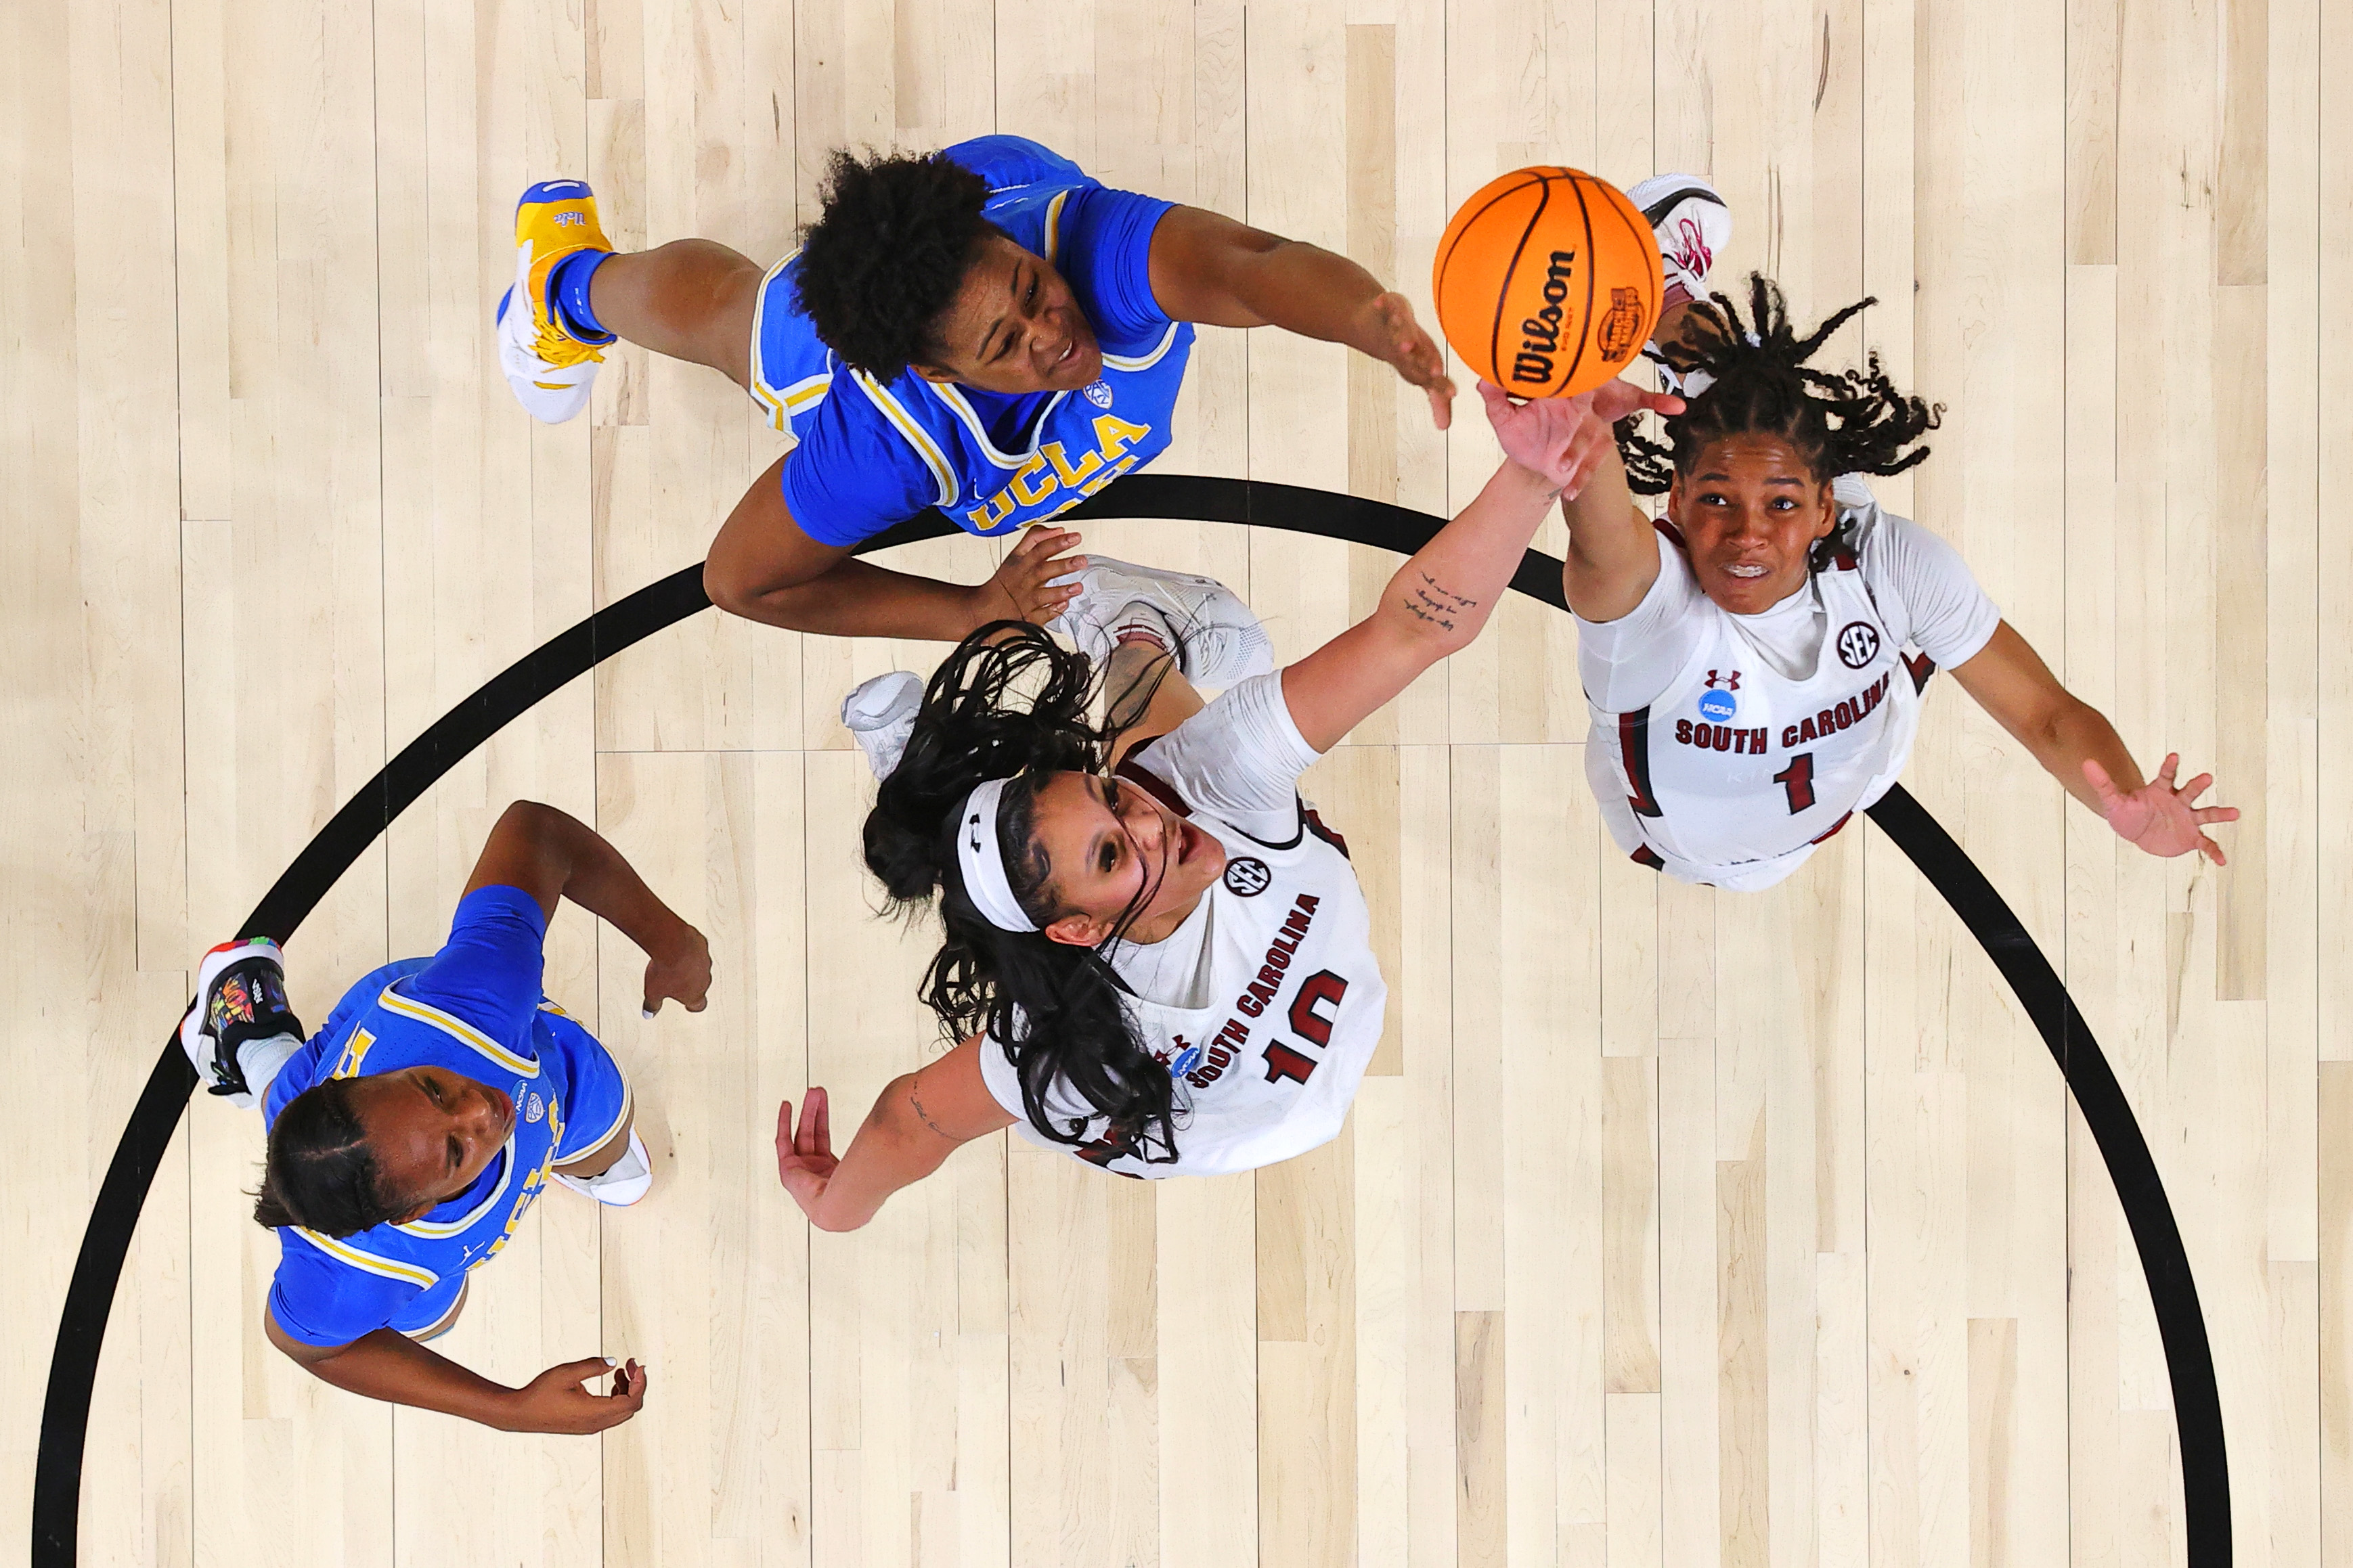  Kamilla Cardoso #10 of the South Carolina Gamecocks and Zia Cooke #1 of the South Carolina Gamecocks go for a rebound against Charisma Osborne #20 of the UCLA Bruins and Christeen Iwuala #22 of the UCLA Bruins in the Sweet 16 round of the NCAA Women's Basketball Tournament 